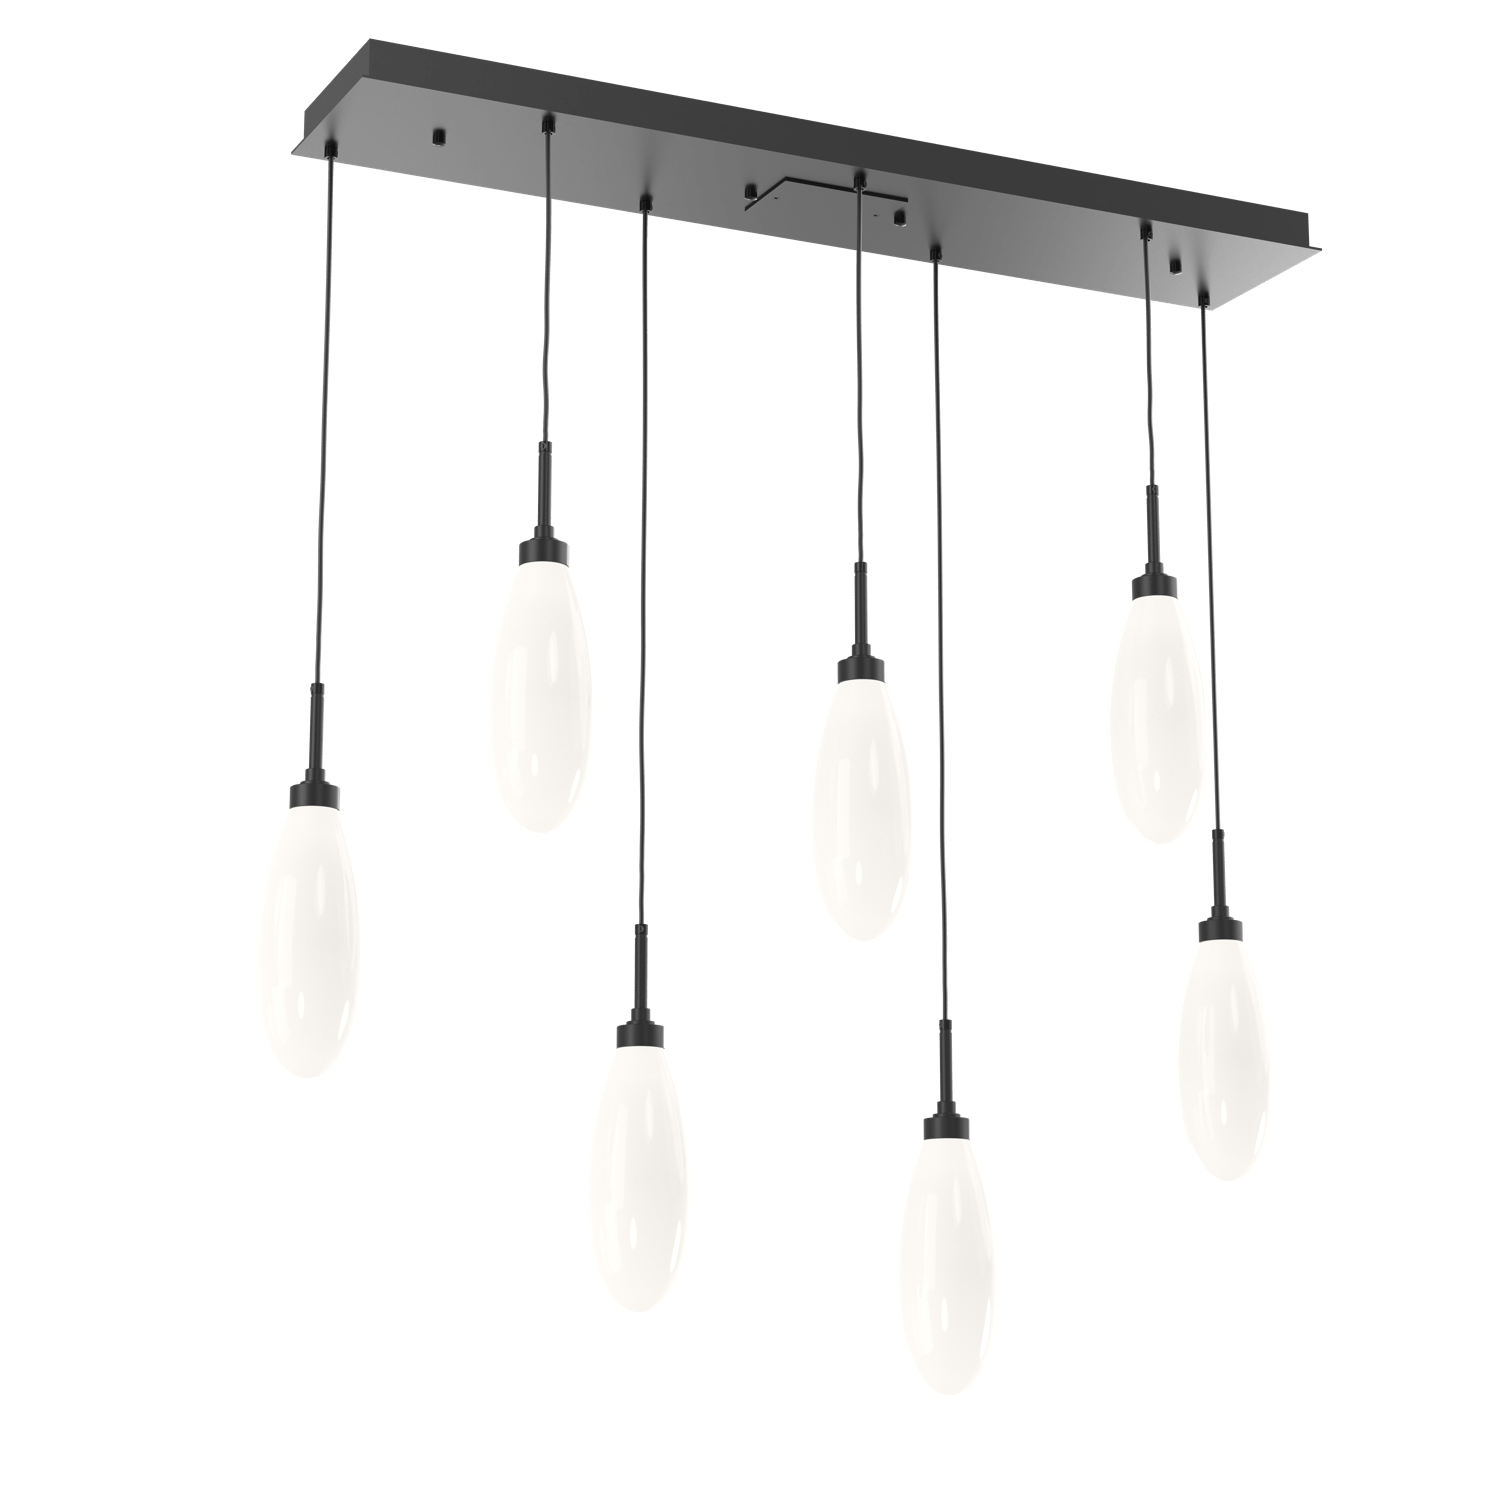 PLB0071-07-MB-WL-LL-Hammerton-Studio-Fiori-7-light-linear-pendant-chandelier-with-matte-black-finish-and-opal-white-glass-shades-and-LED-lamping